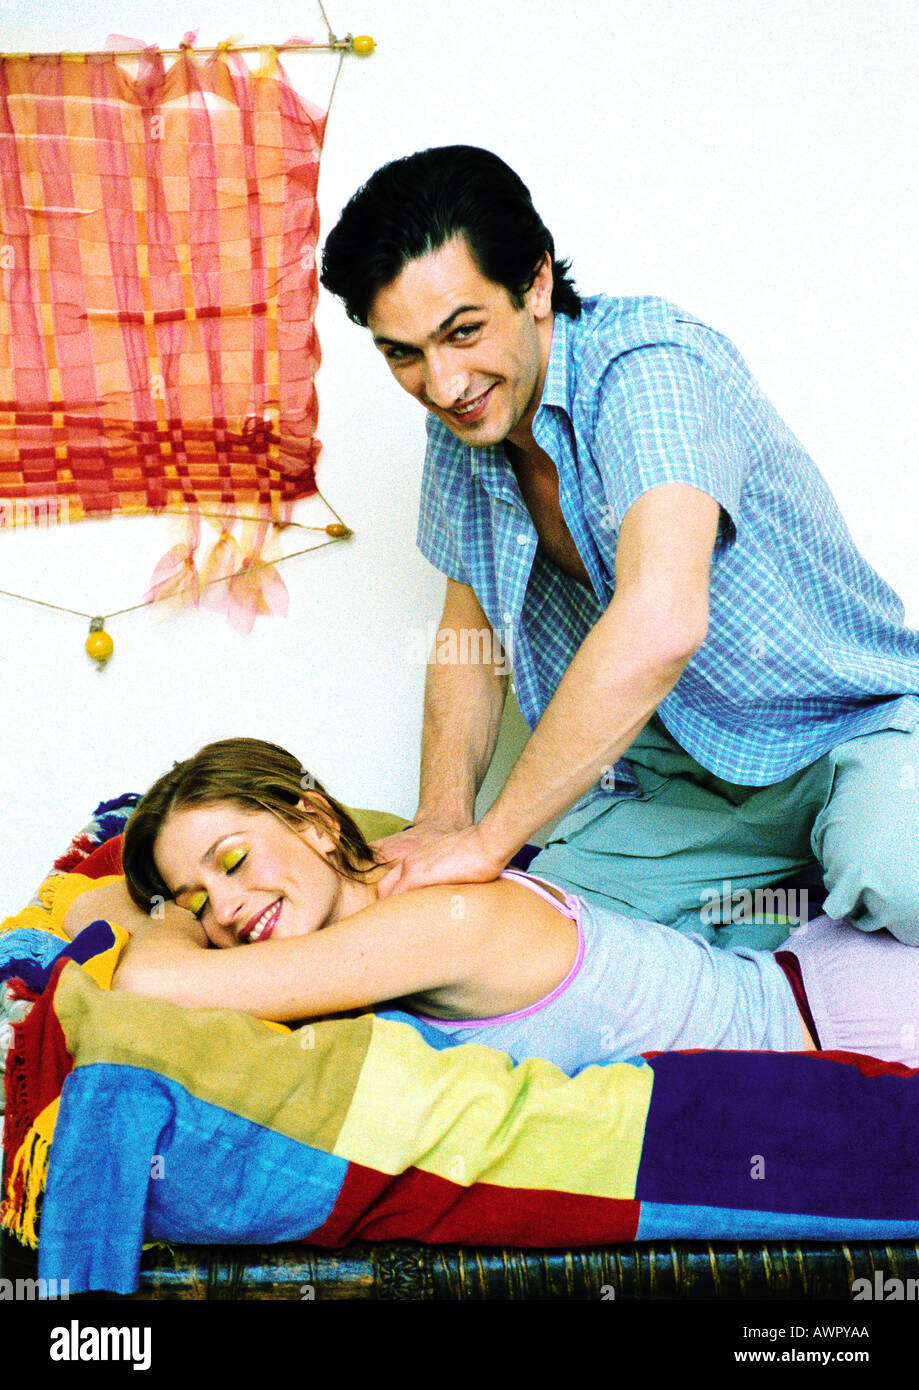 Woman lying on bed smiling, man giving her massage, looking into camera. Stock Photo